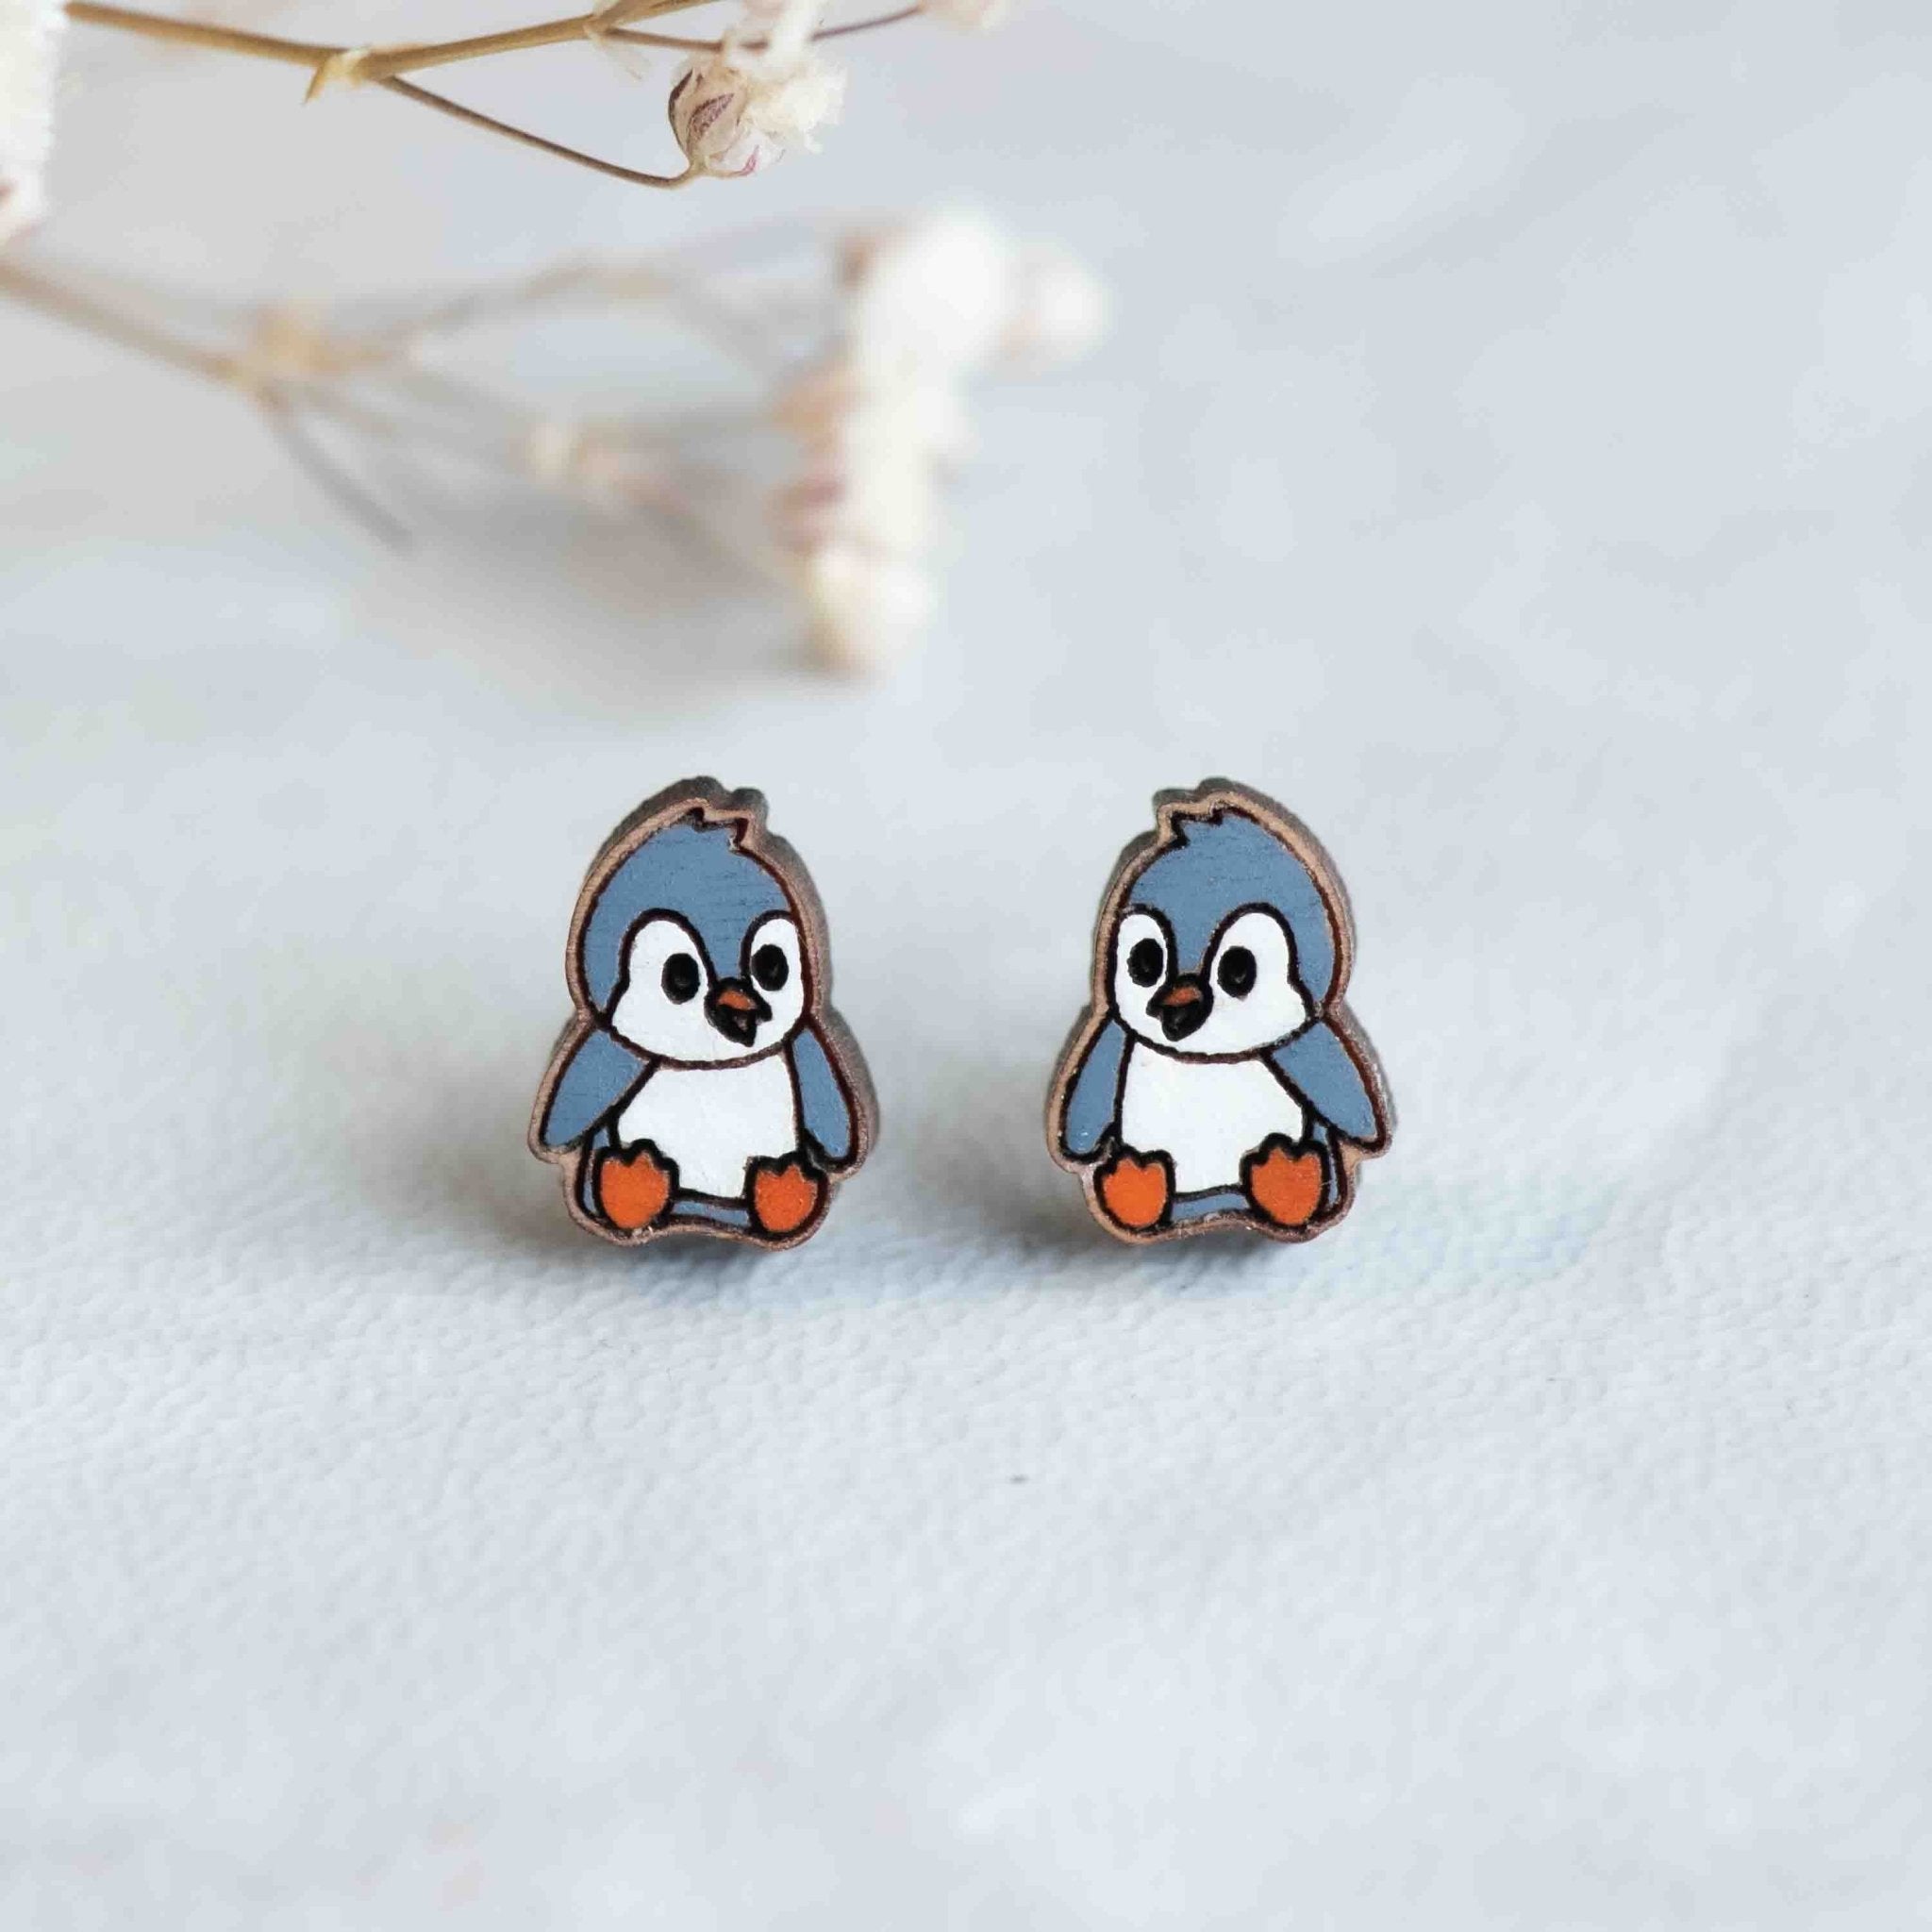 Hand-painted Baby Penguin Earrings Cherry Wood Earrings - PEB12054 - Robin Valley Official Store